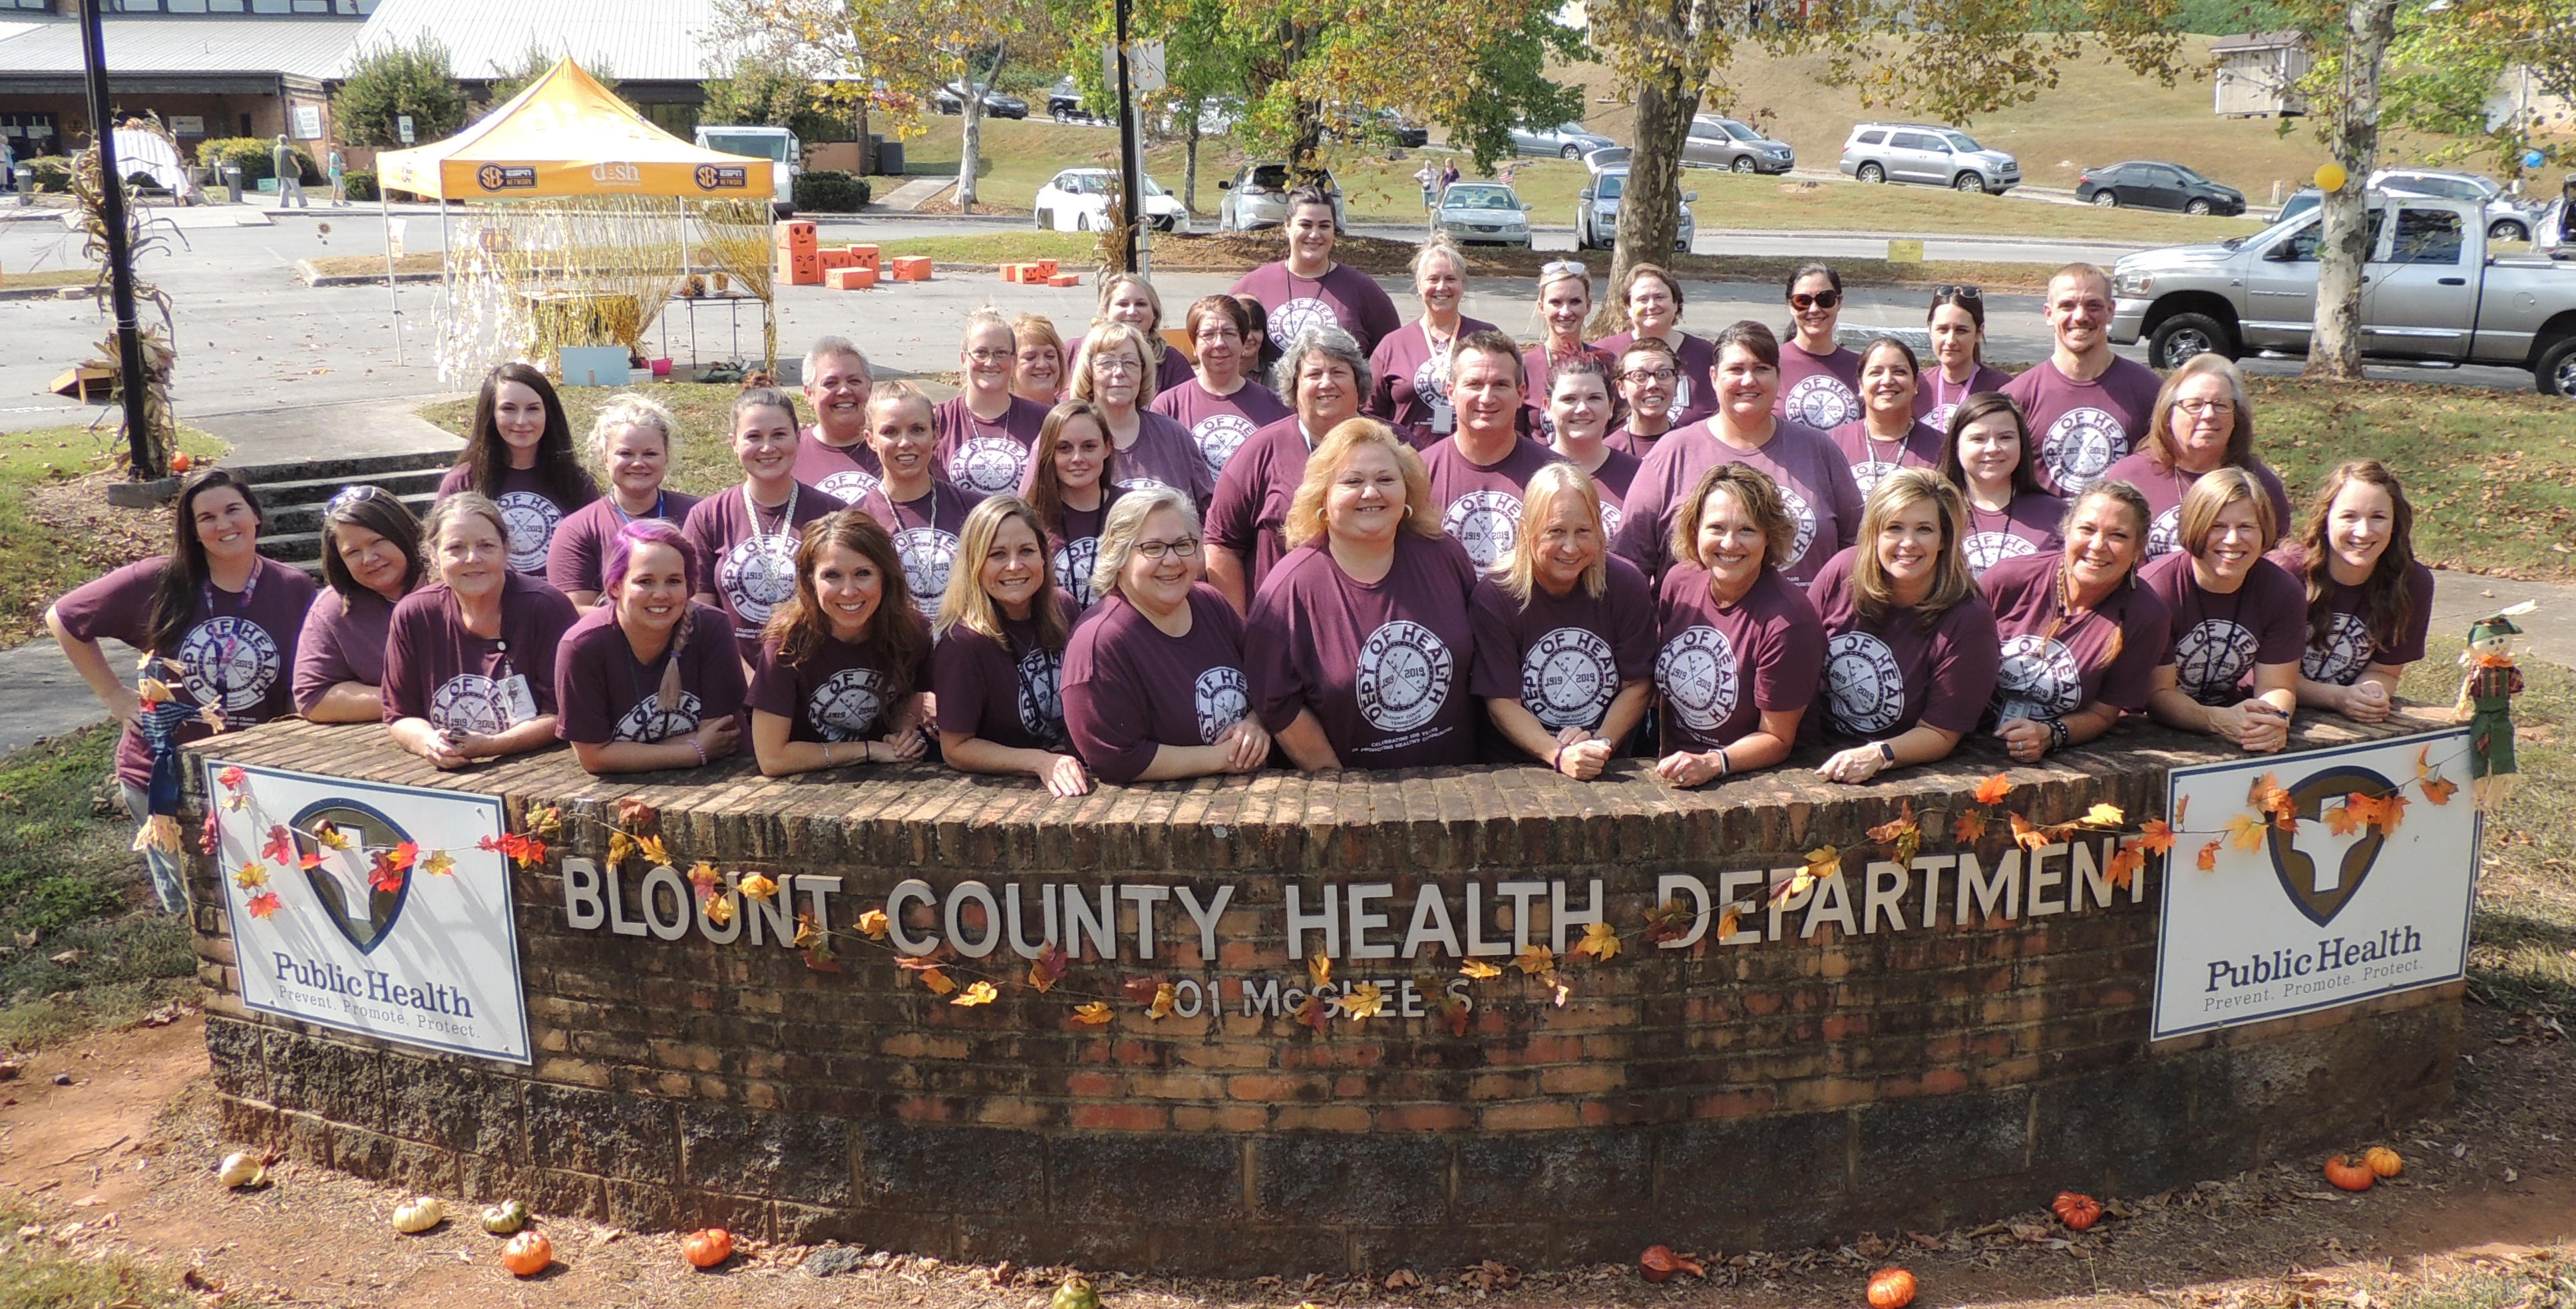 BLOUNT COUNTY HEALTH DEPARTMENT CELEBRATES 100 YEARS OF PUBLIC HEALTH